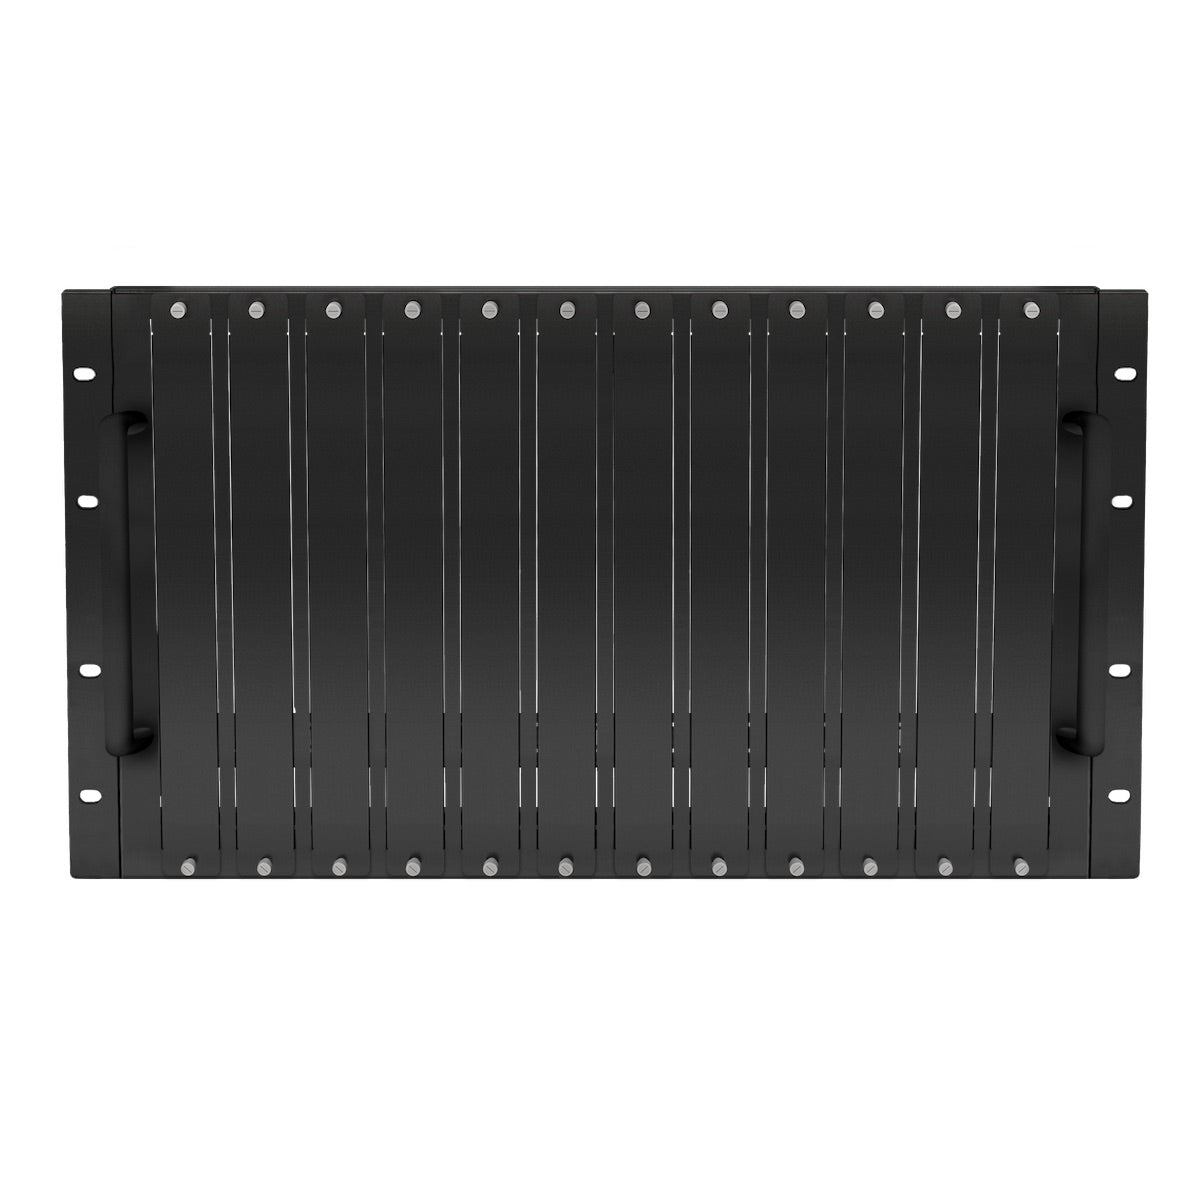 WyreStorm NHD-000-RACK4 - 6U 12-Slot Rack Mount for NetworkHD devices, front included 7 blanking plates